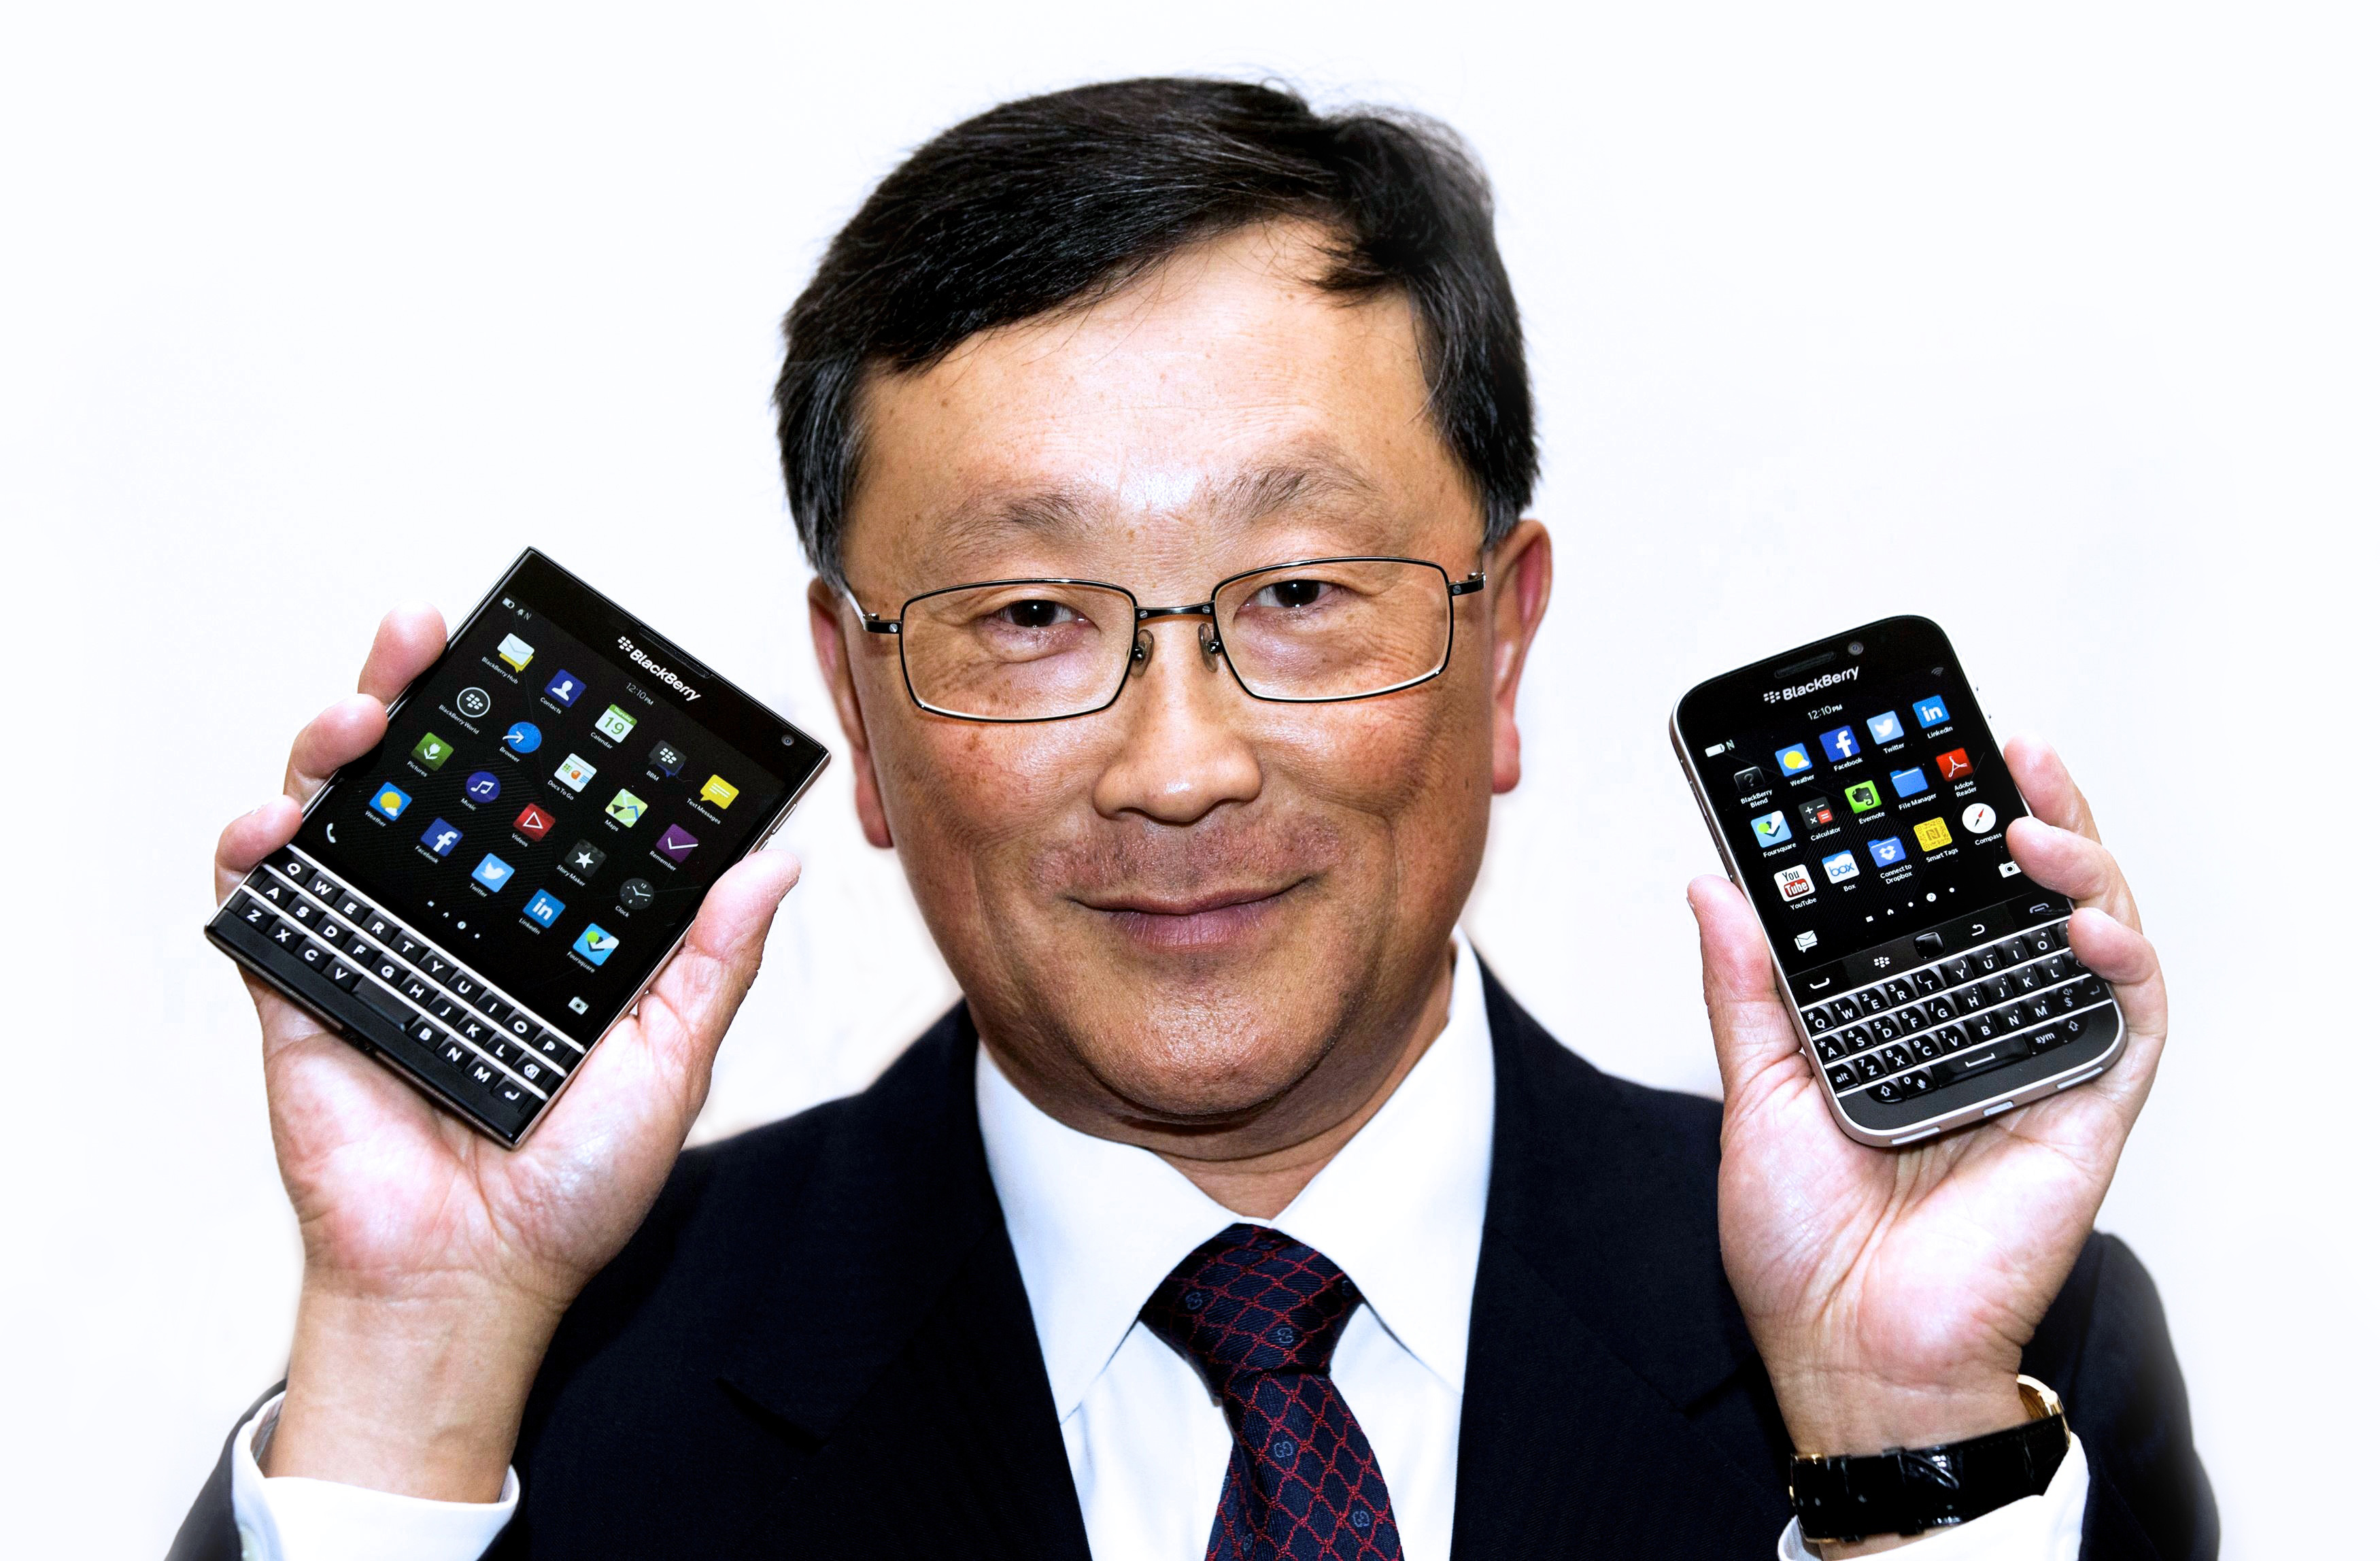 BlackBerry CEO Chen holds up the unreleased Blackberry Passport and Blackberry Classic devices during the company's annual general meeting for shareholders in Toronto